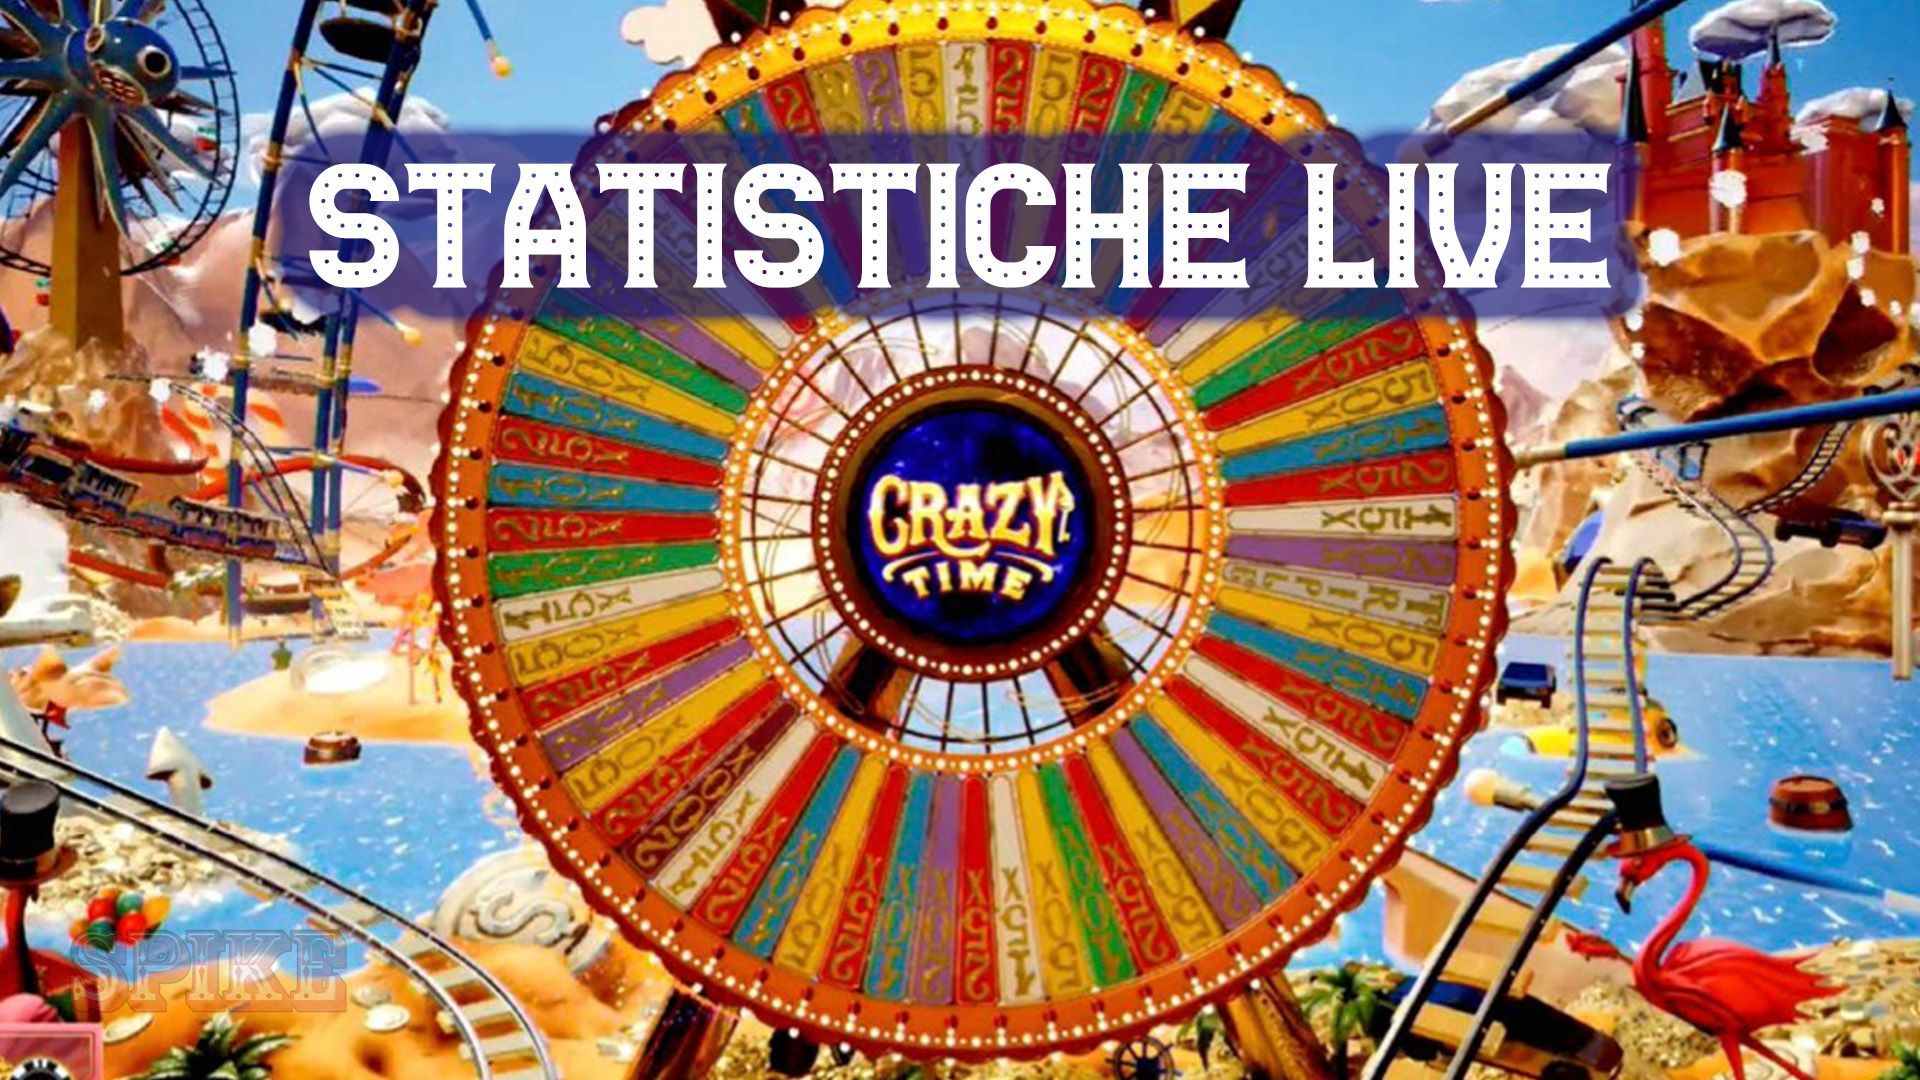 Crazy Time Stats Live Card